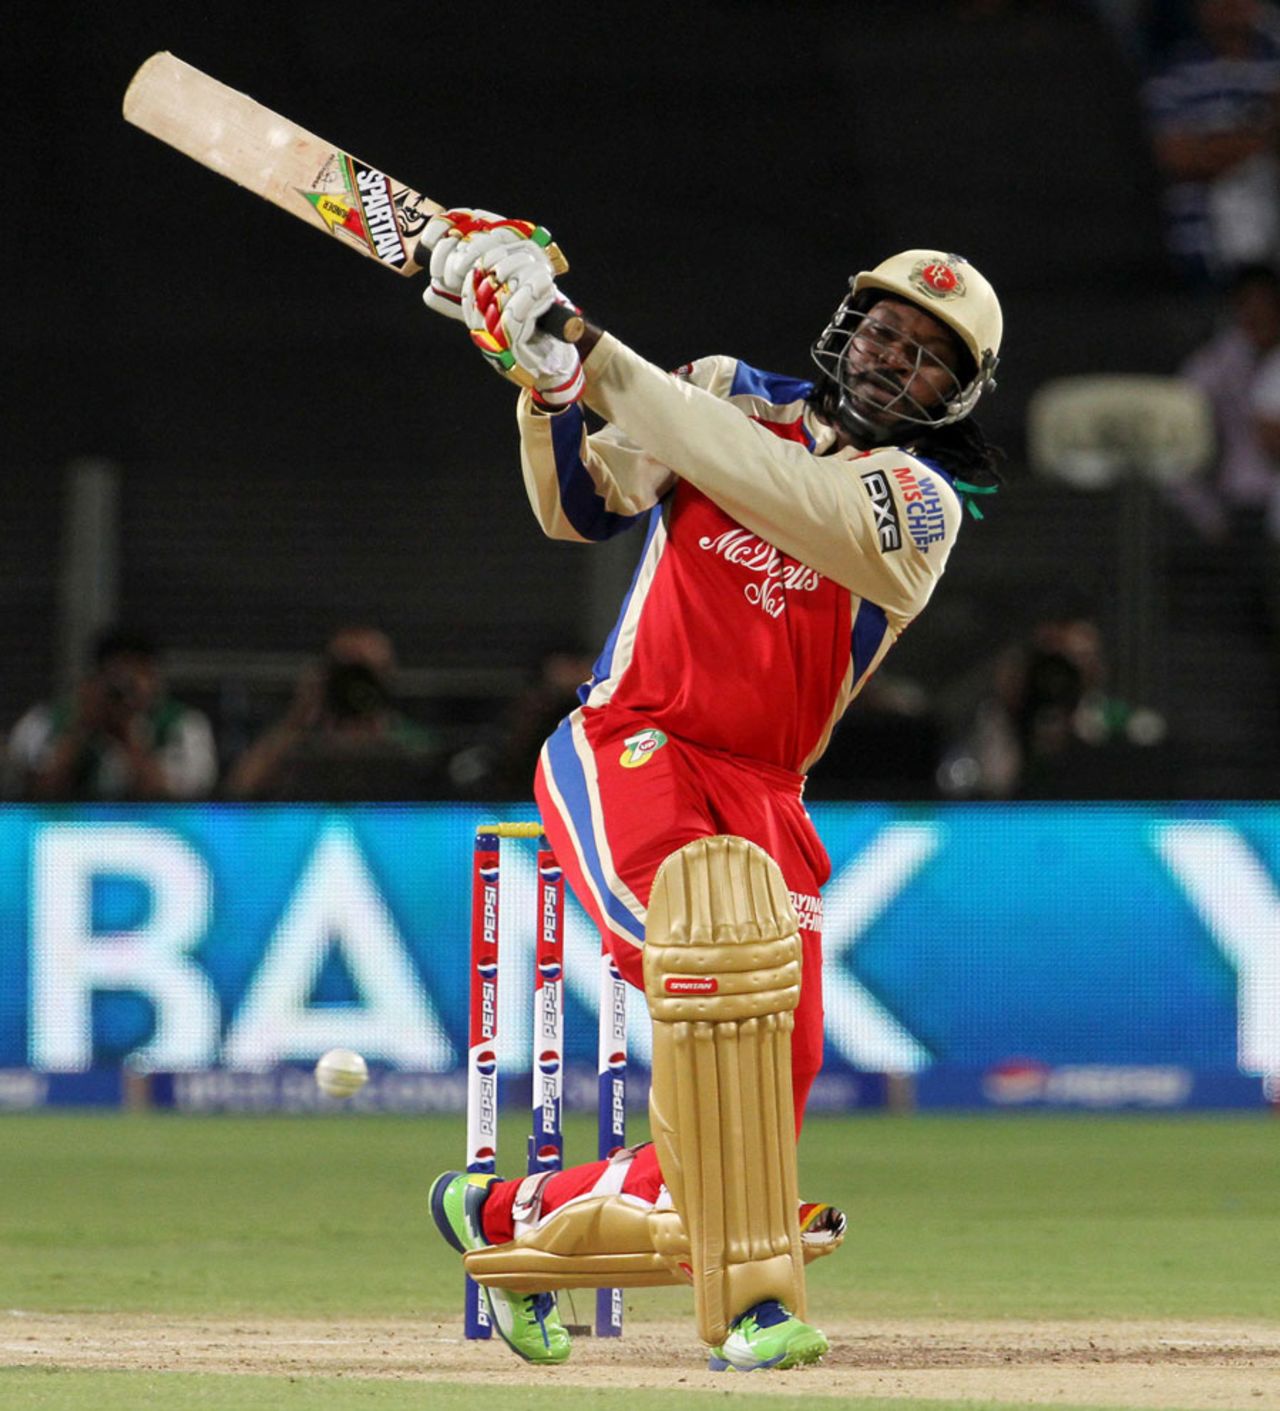 Chris Gayle smashes a ball through the leg side, Pune Warriors v Royal Challengers Bangalore, IPL 2013, Pune, May 2, 2013